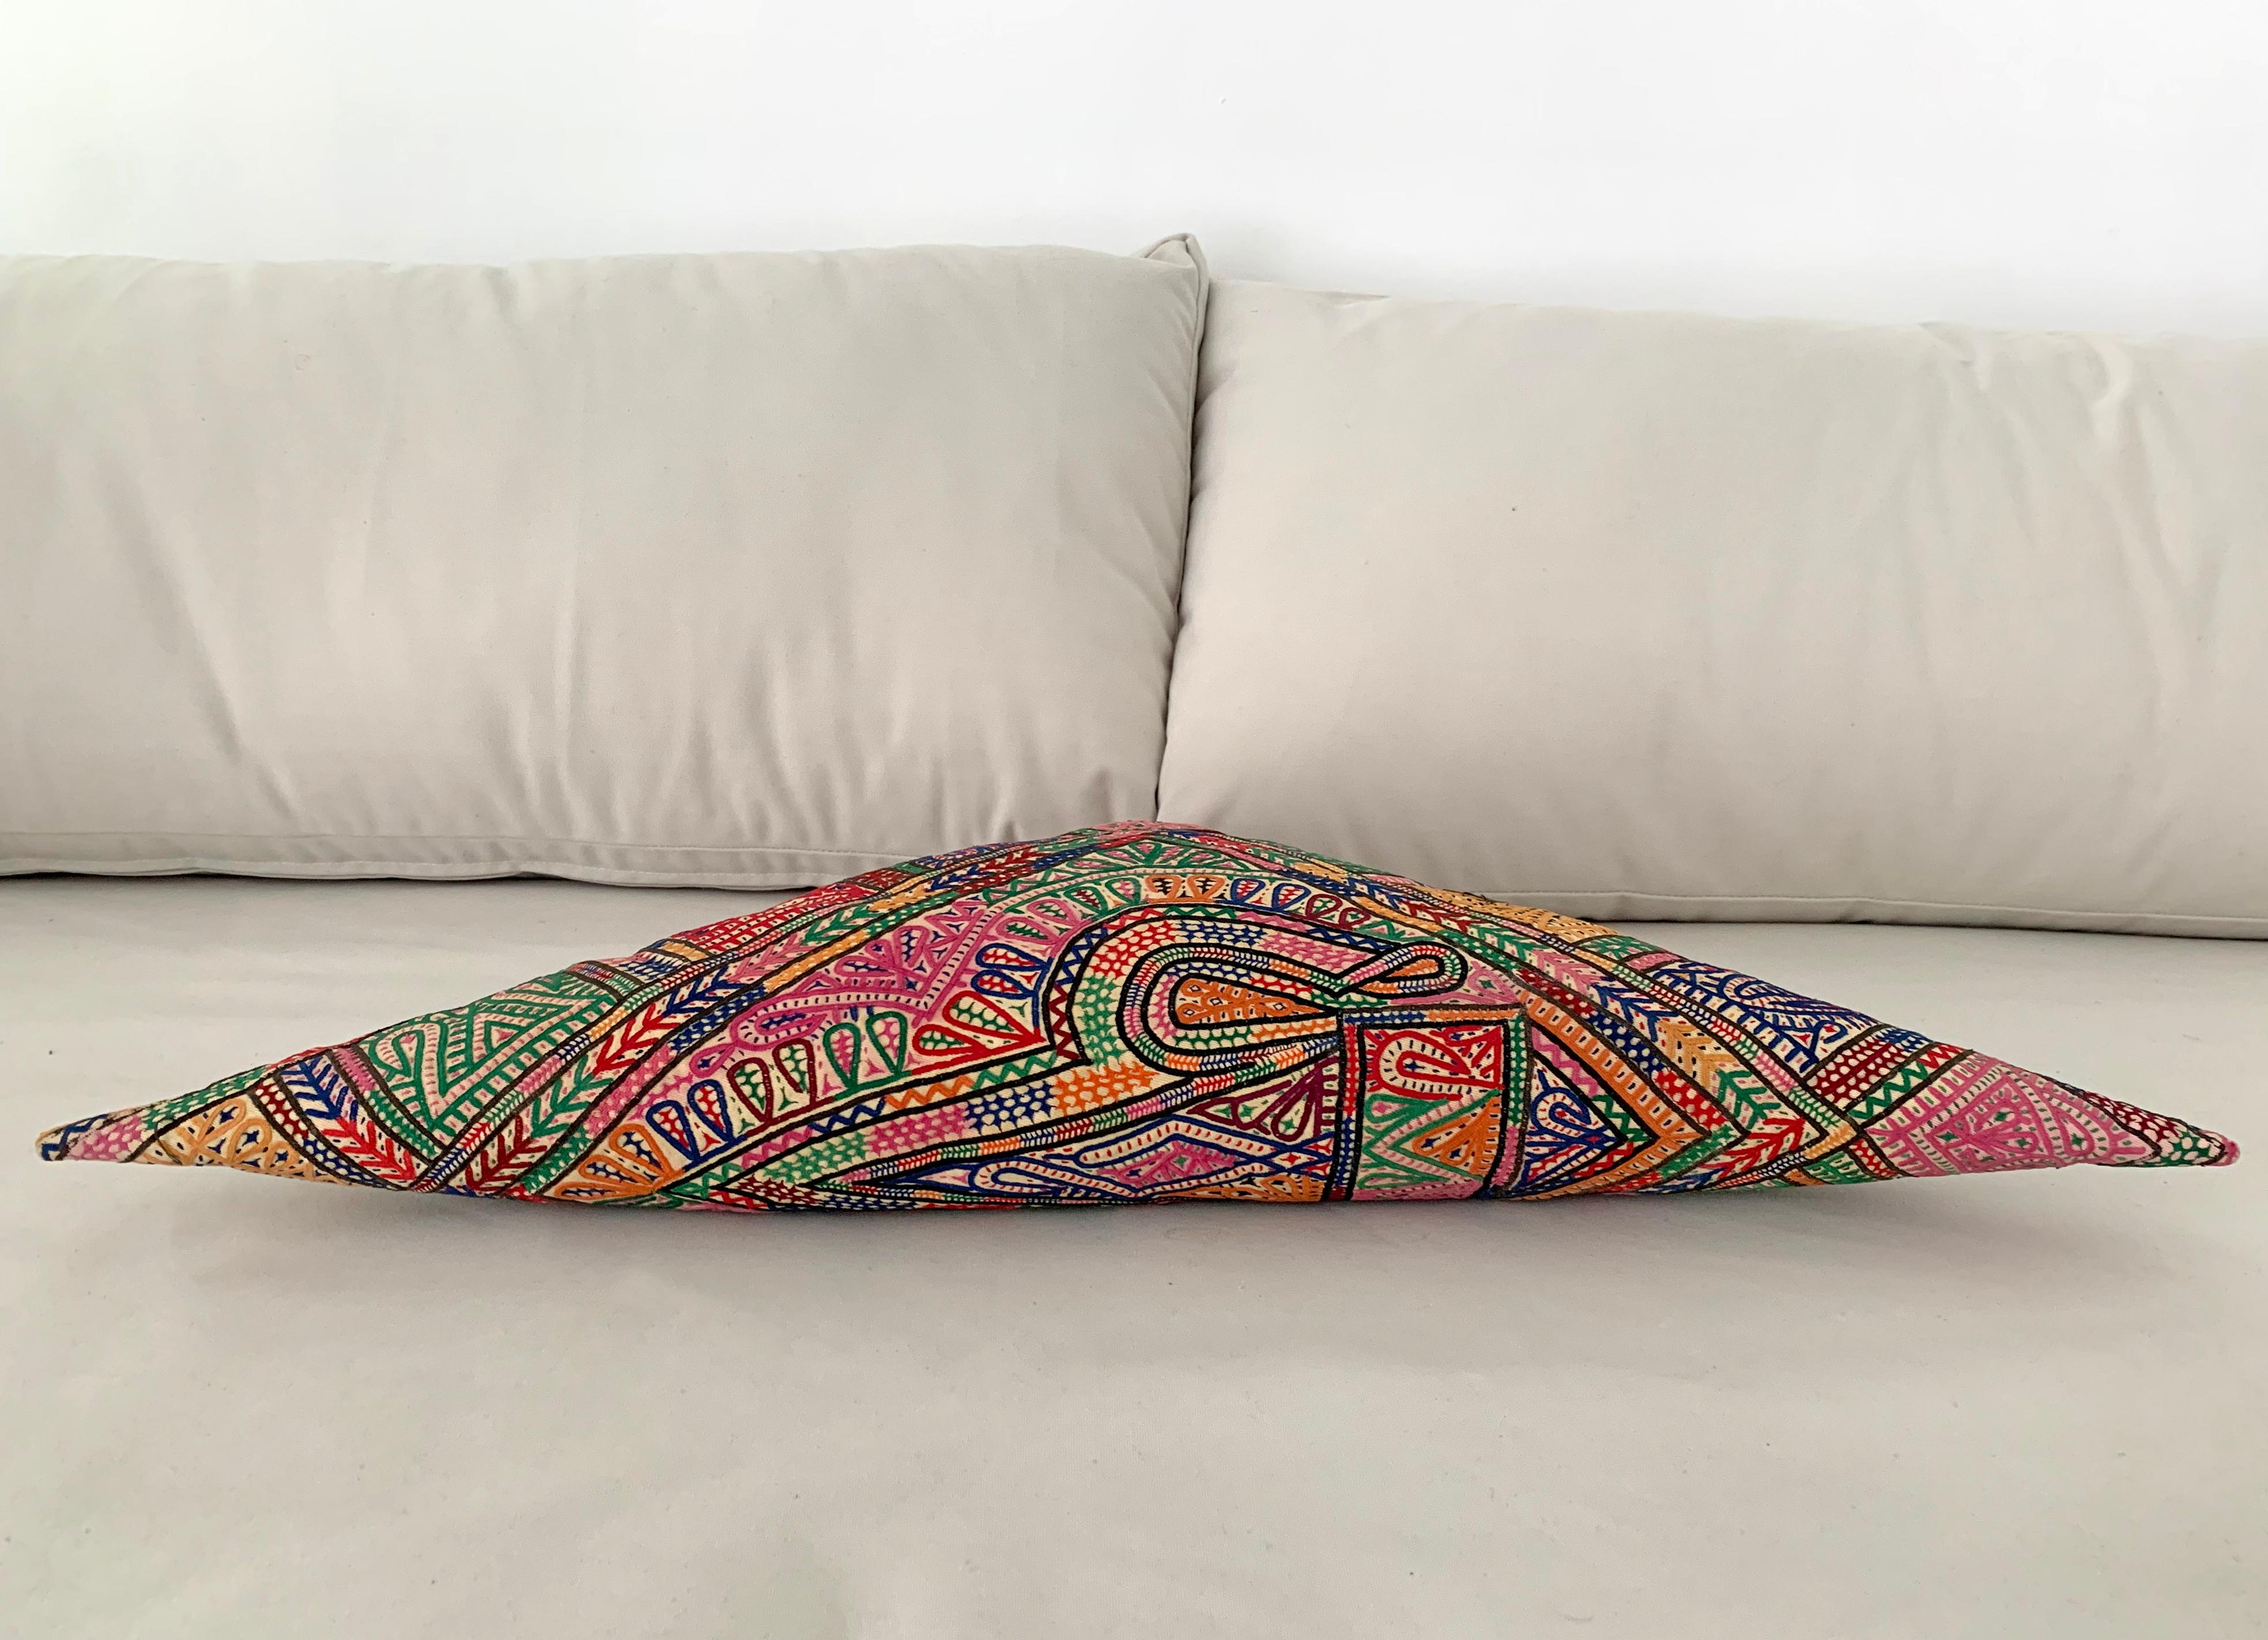 Fabric Vintage Indian Decorative Pillow with Colourful Embroidery